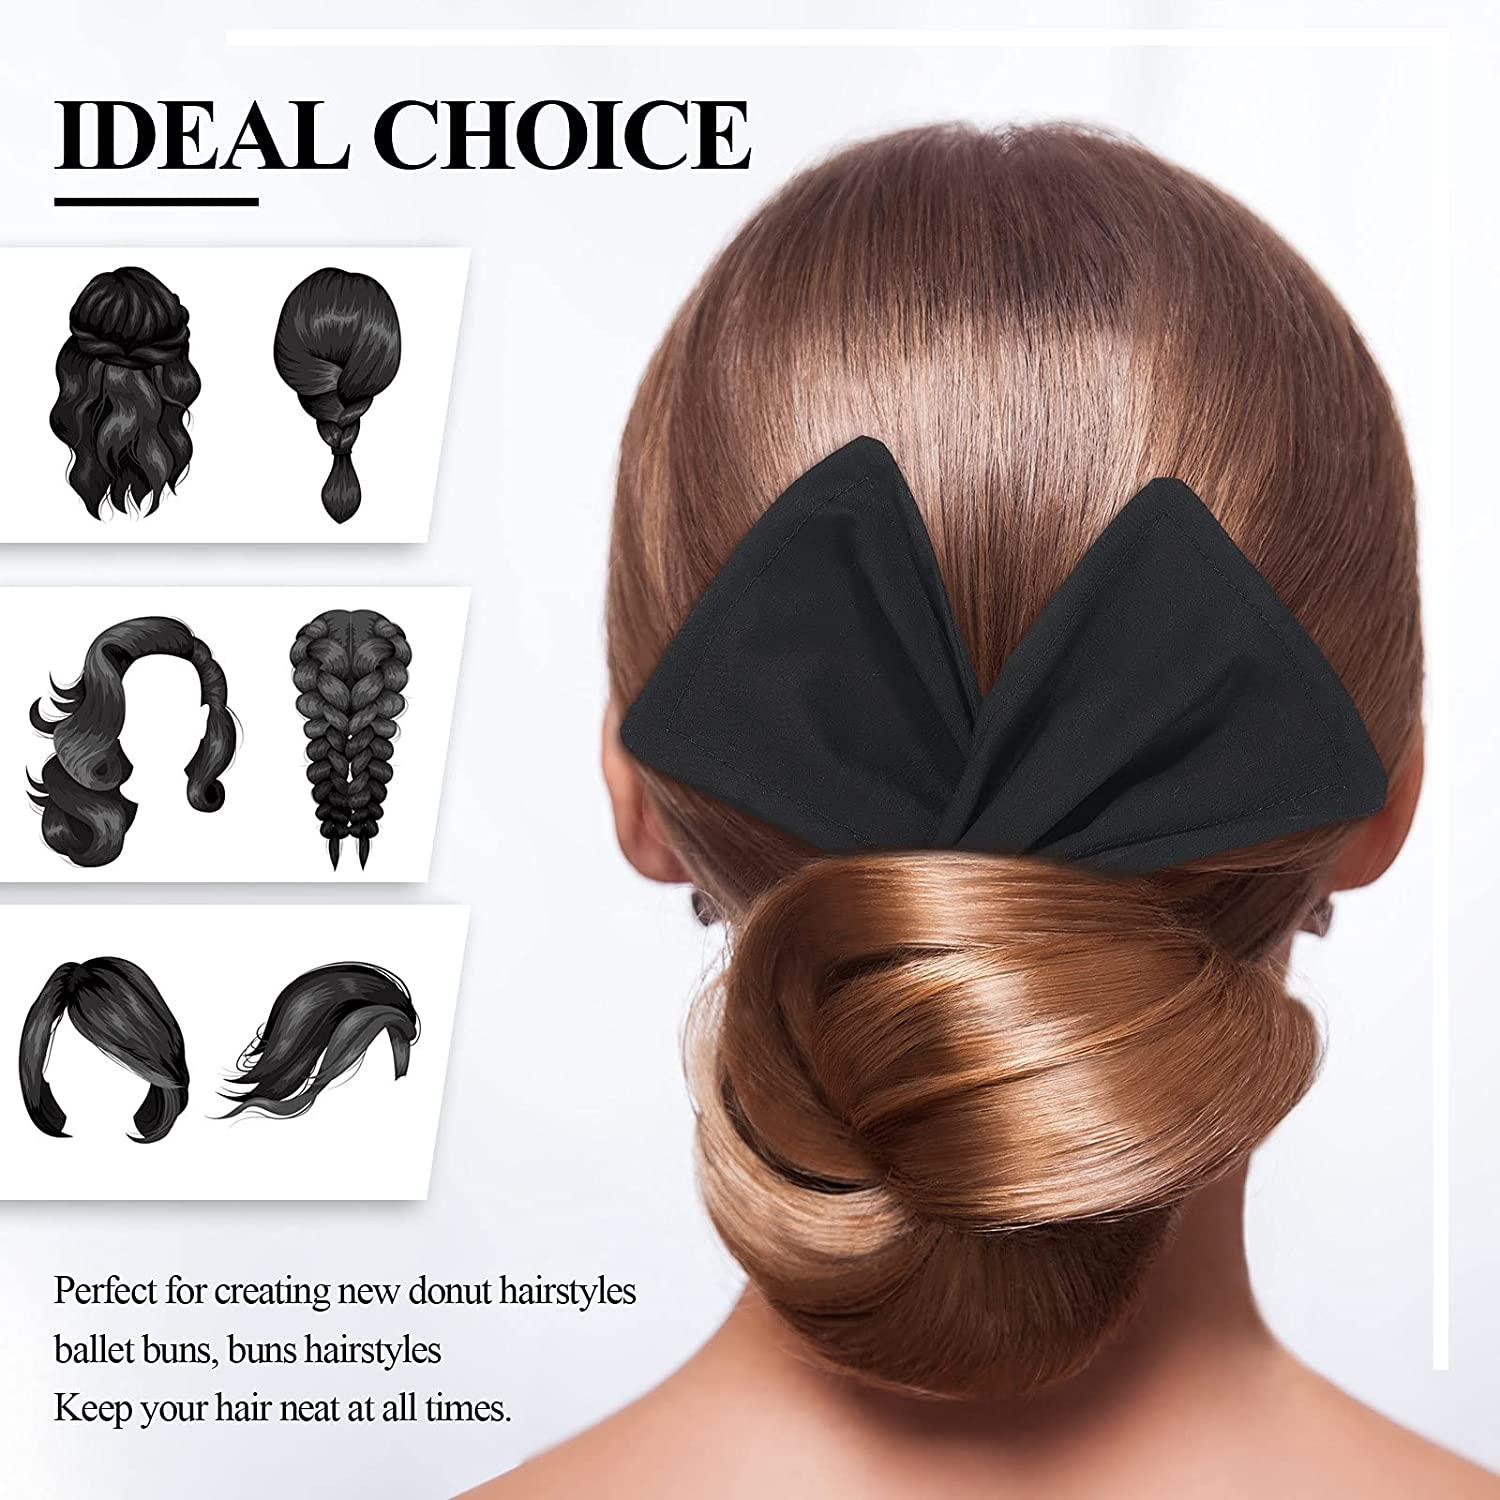 Hair Accessories for Stylish Hairstyles